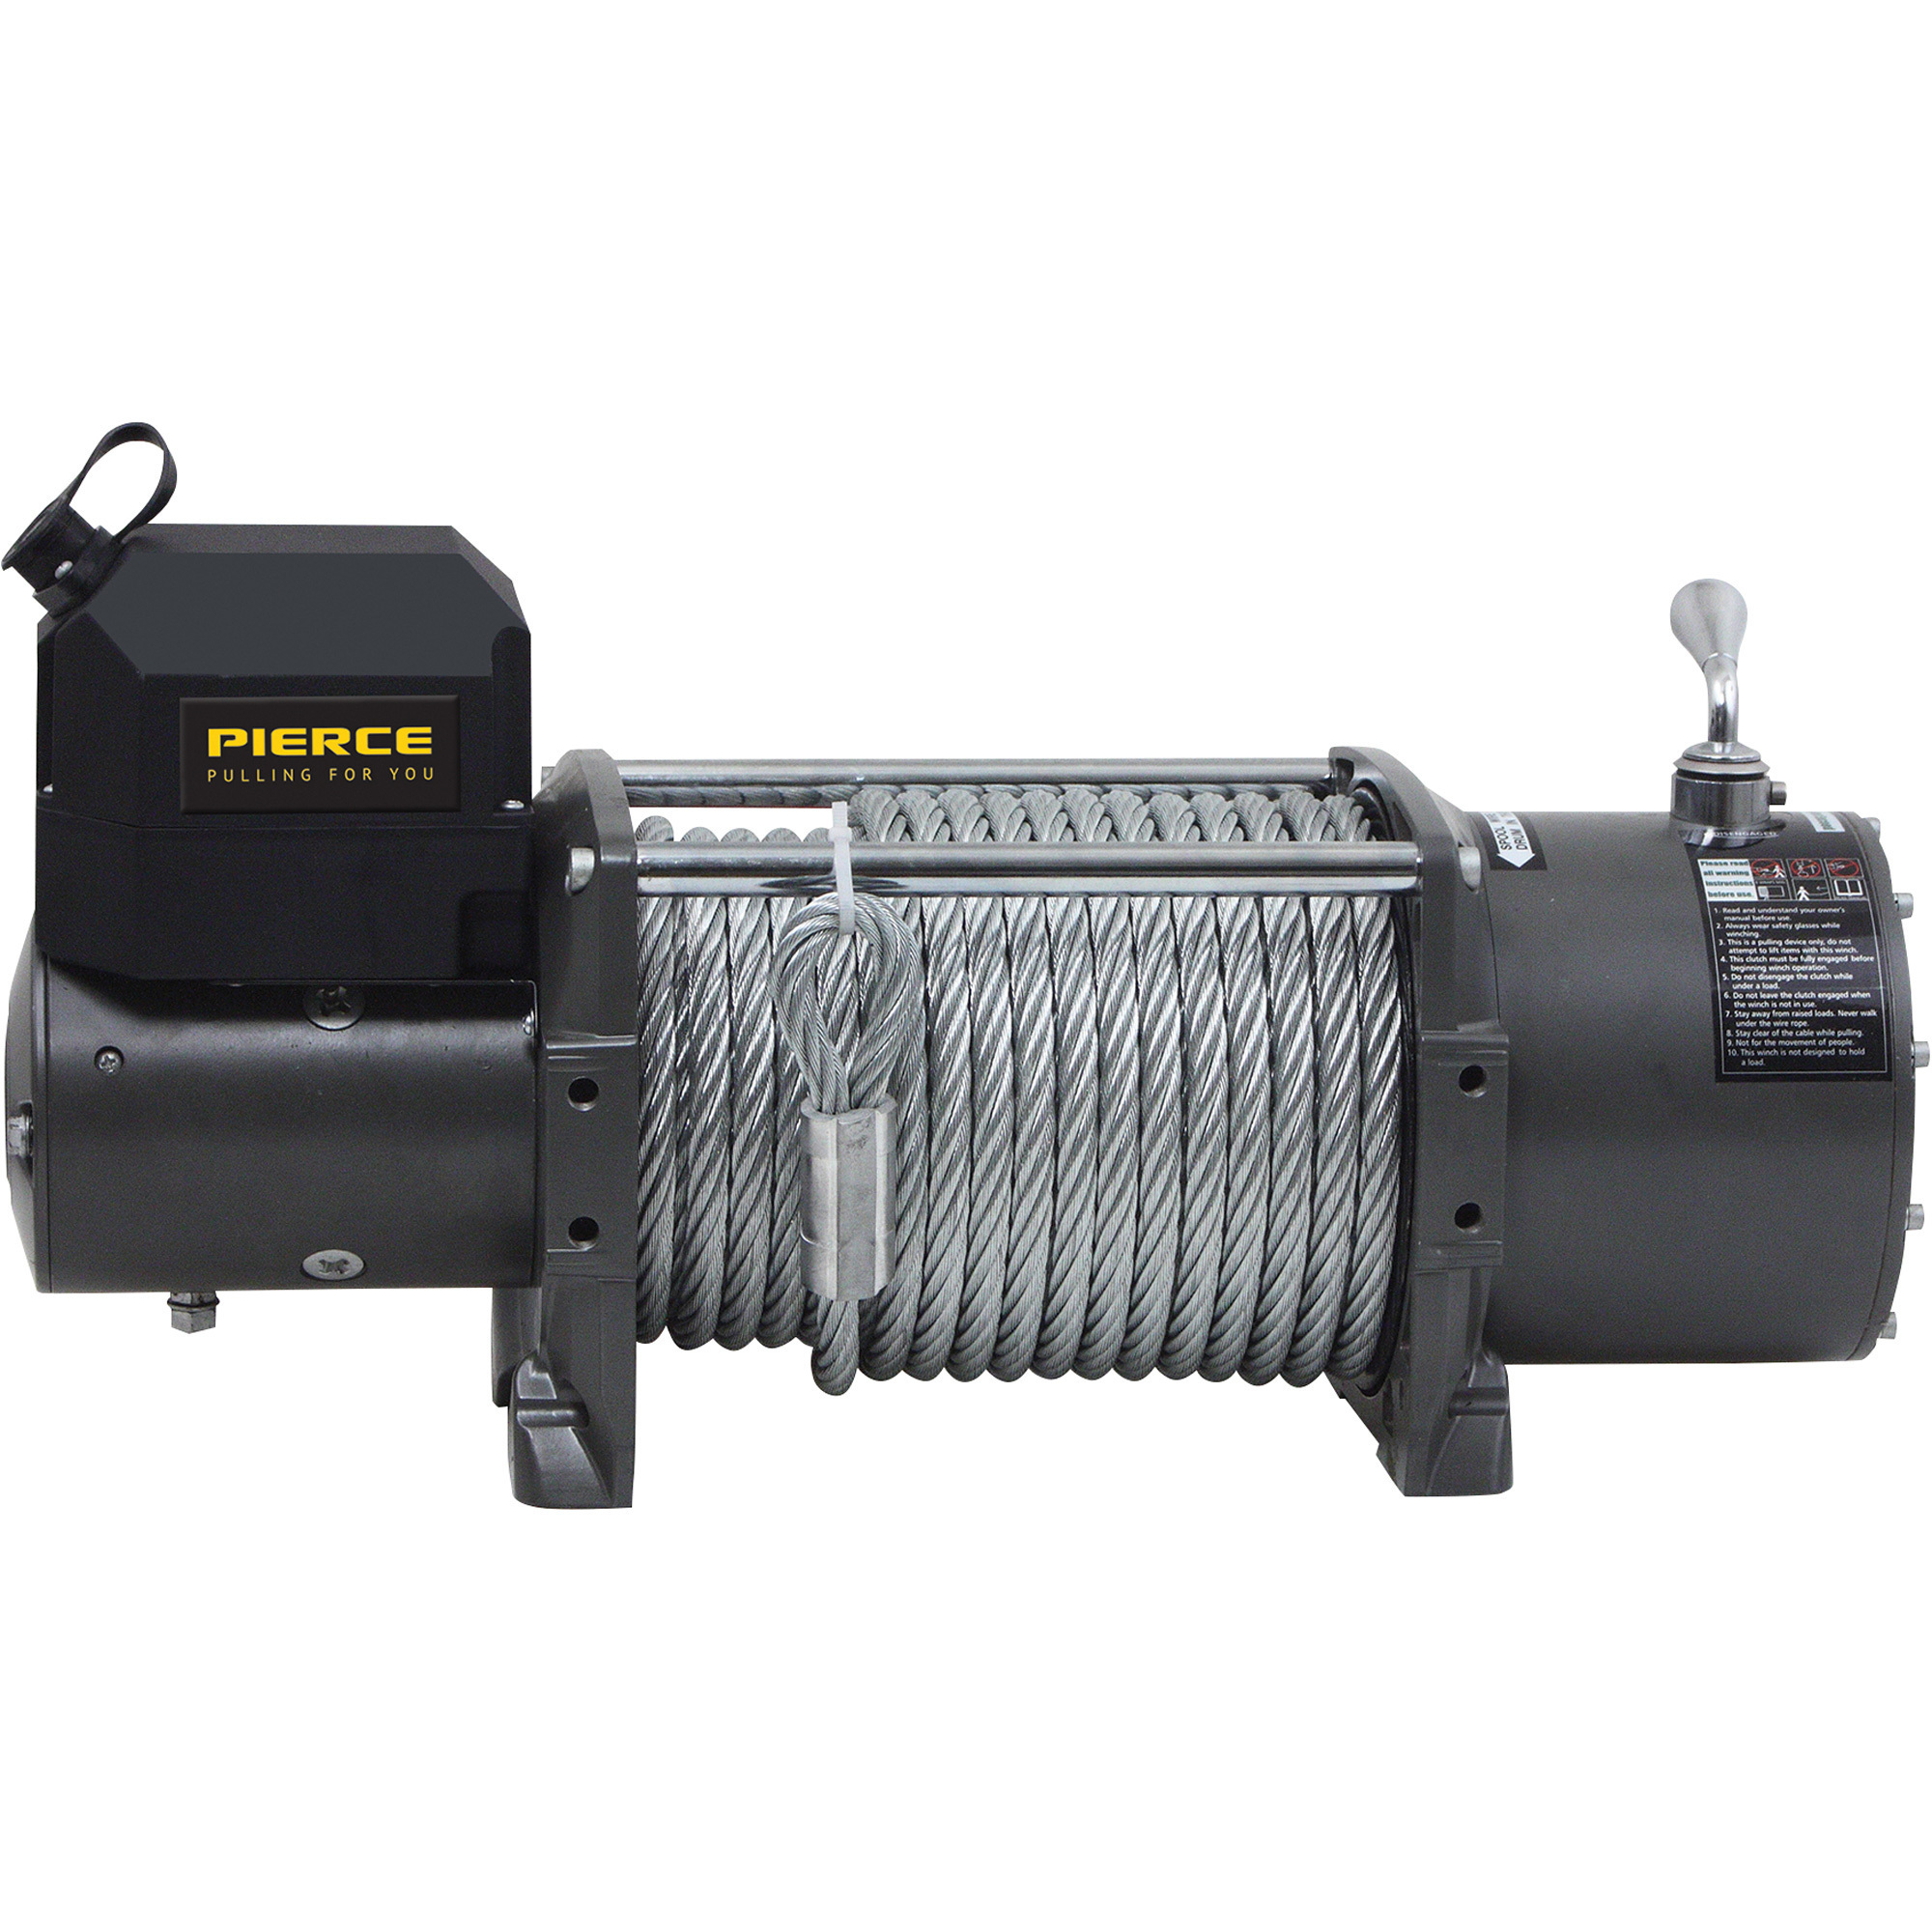 Pierce 12 Volt DC Powered Electric Trunk Winch, 20,000-Lb. Capacity, Steel Rope, Model PS20000